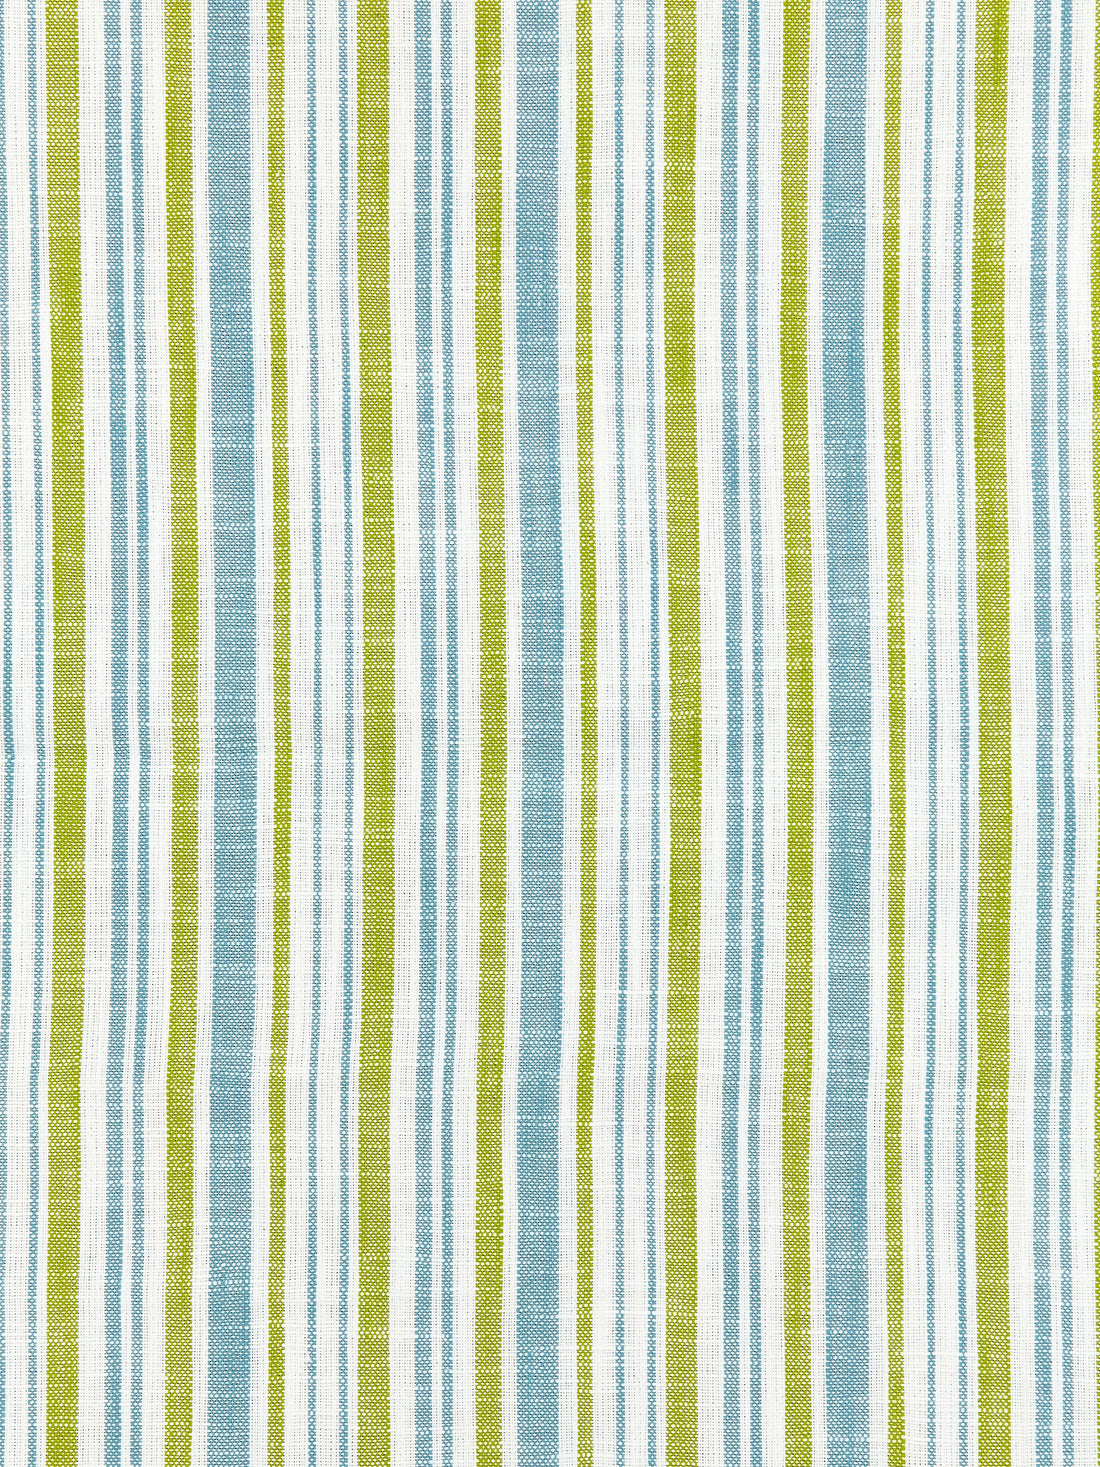 Pembroke Stripe fabric in ocean palm color - pattern number SC 000327116 - by Scalamandre in the Scalamandre Fabrics Book 1 collection